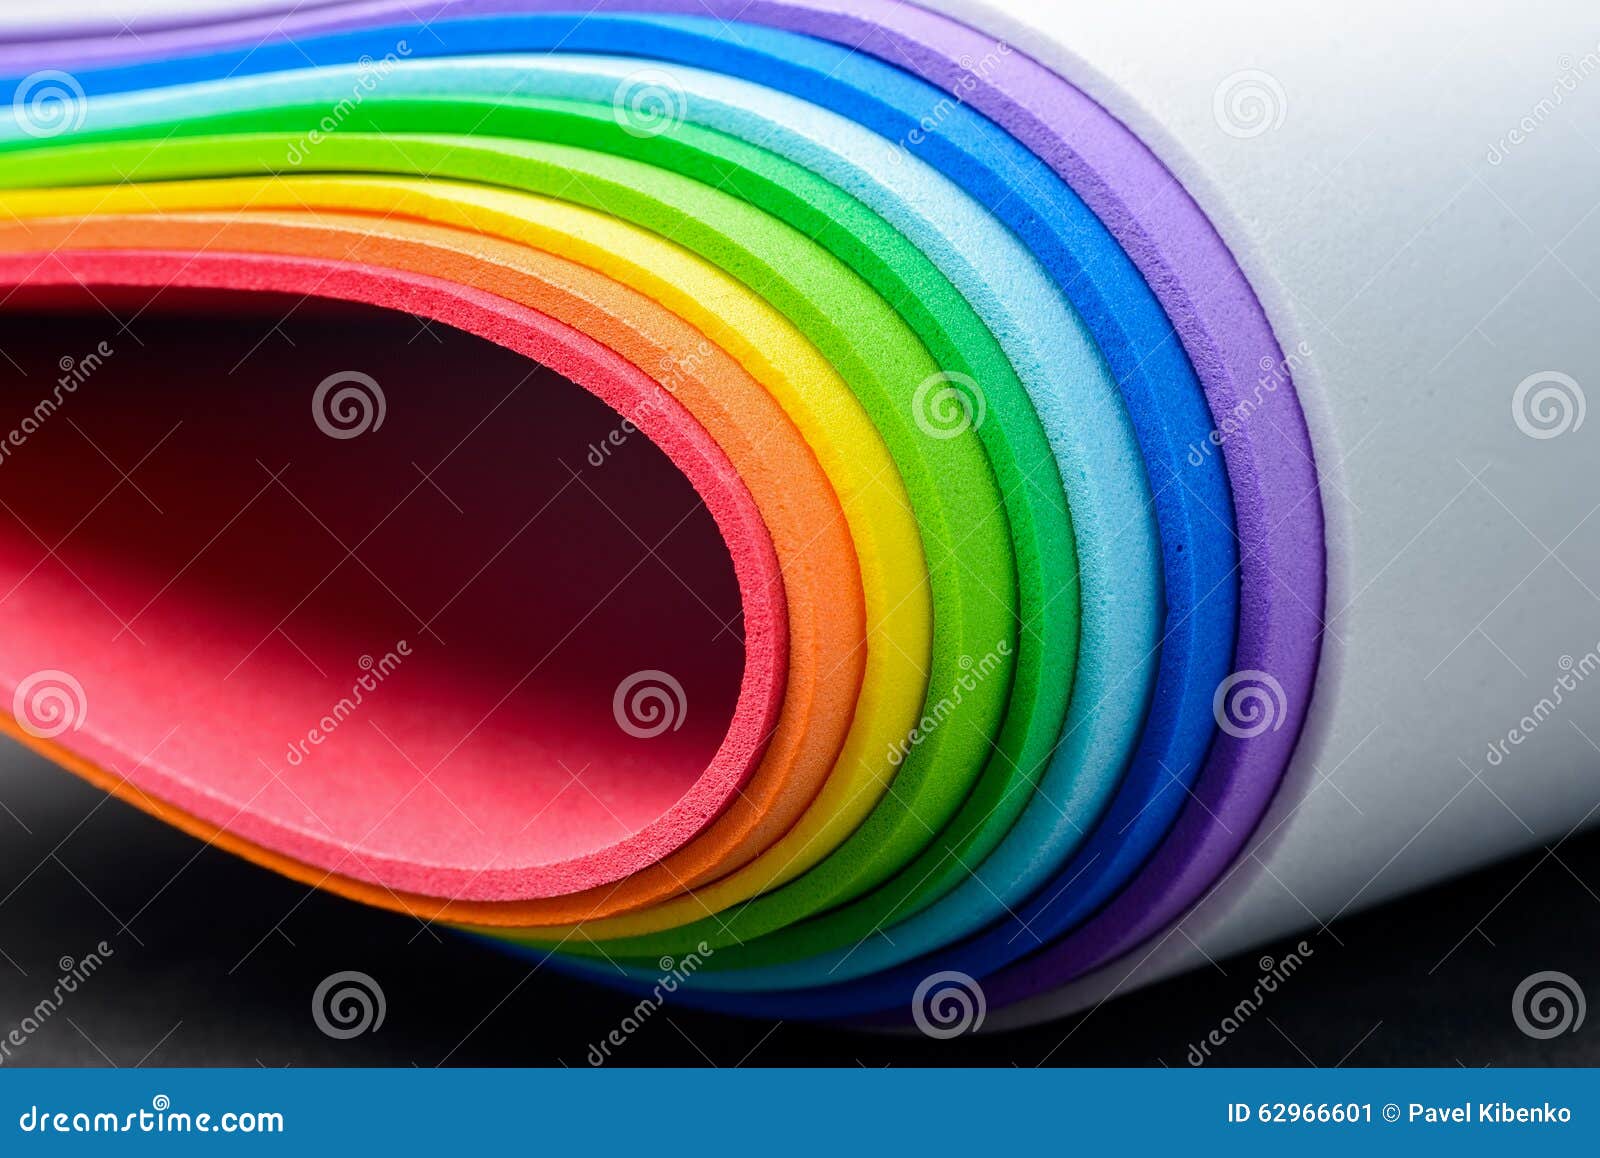 Iridescent Colors of Cellular Rubber Stock Image - Image of light ...